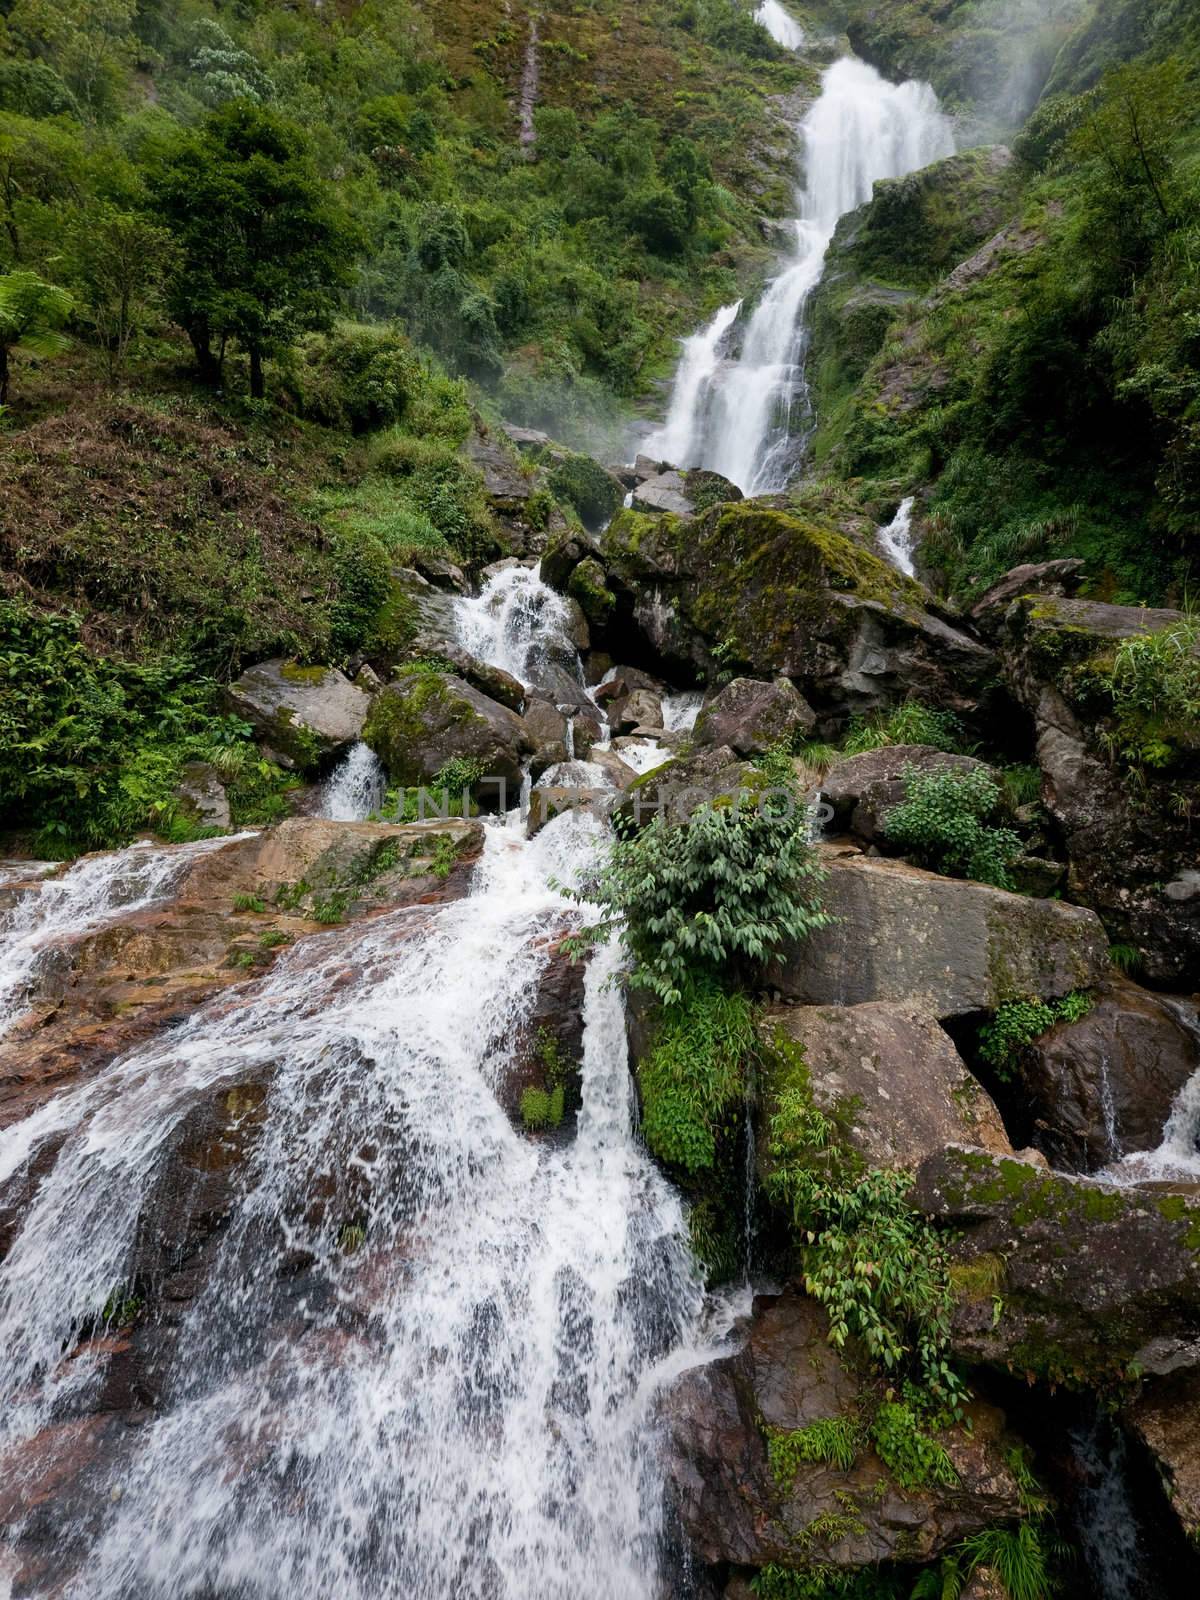 Thac Bac or Silver waterfall in Sapa Valley, Vietnam